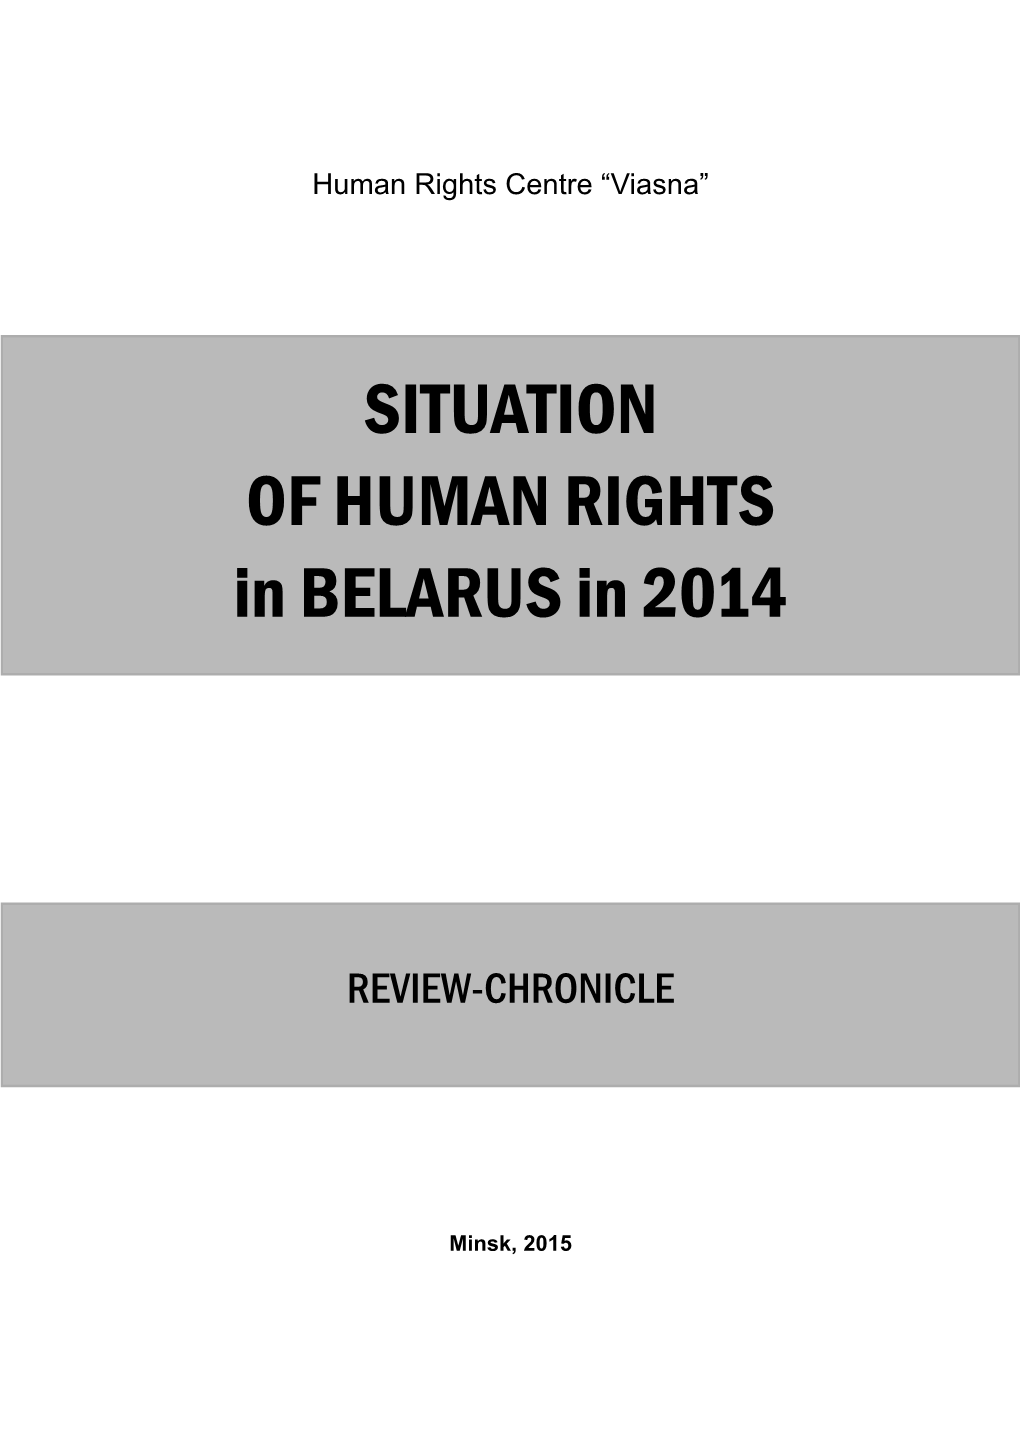 SITUATION of HUMAN RIGHTS in BELARUS in 2014